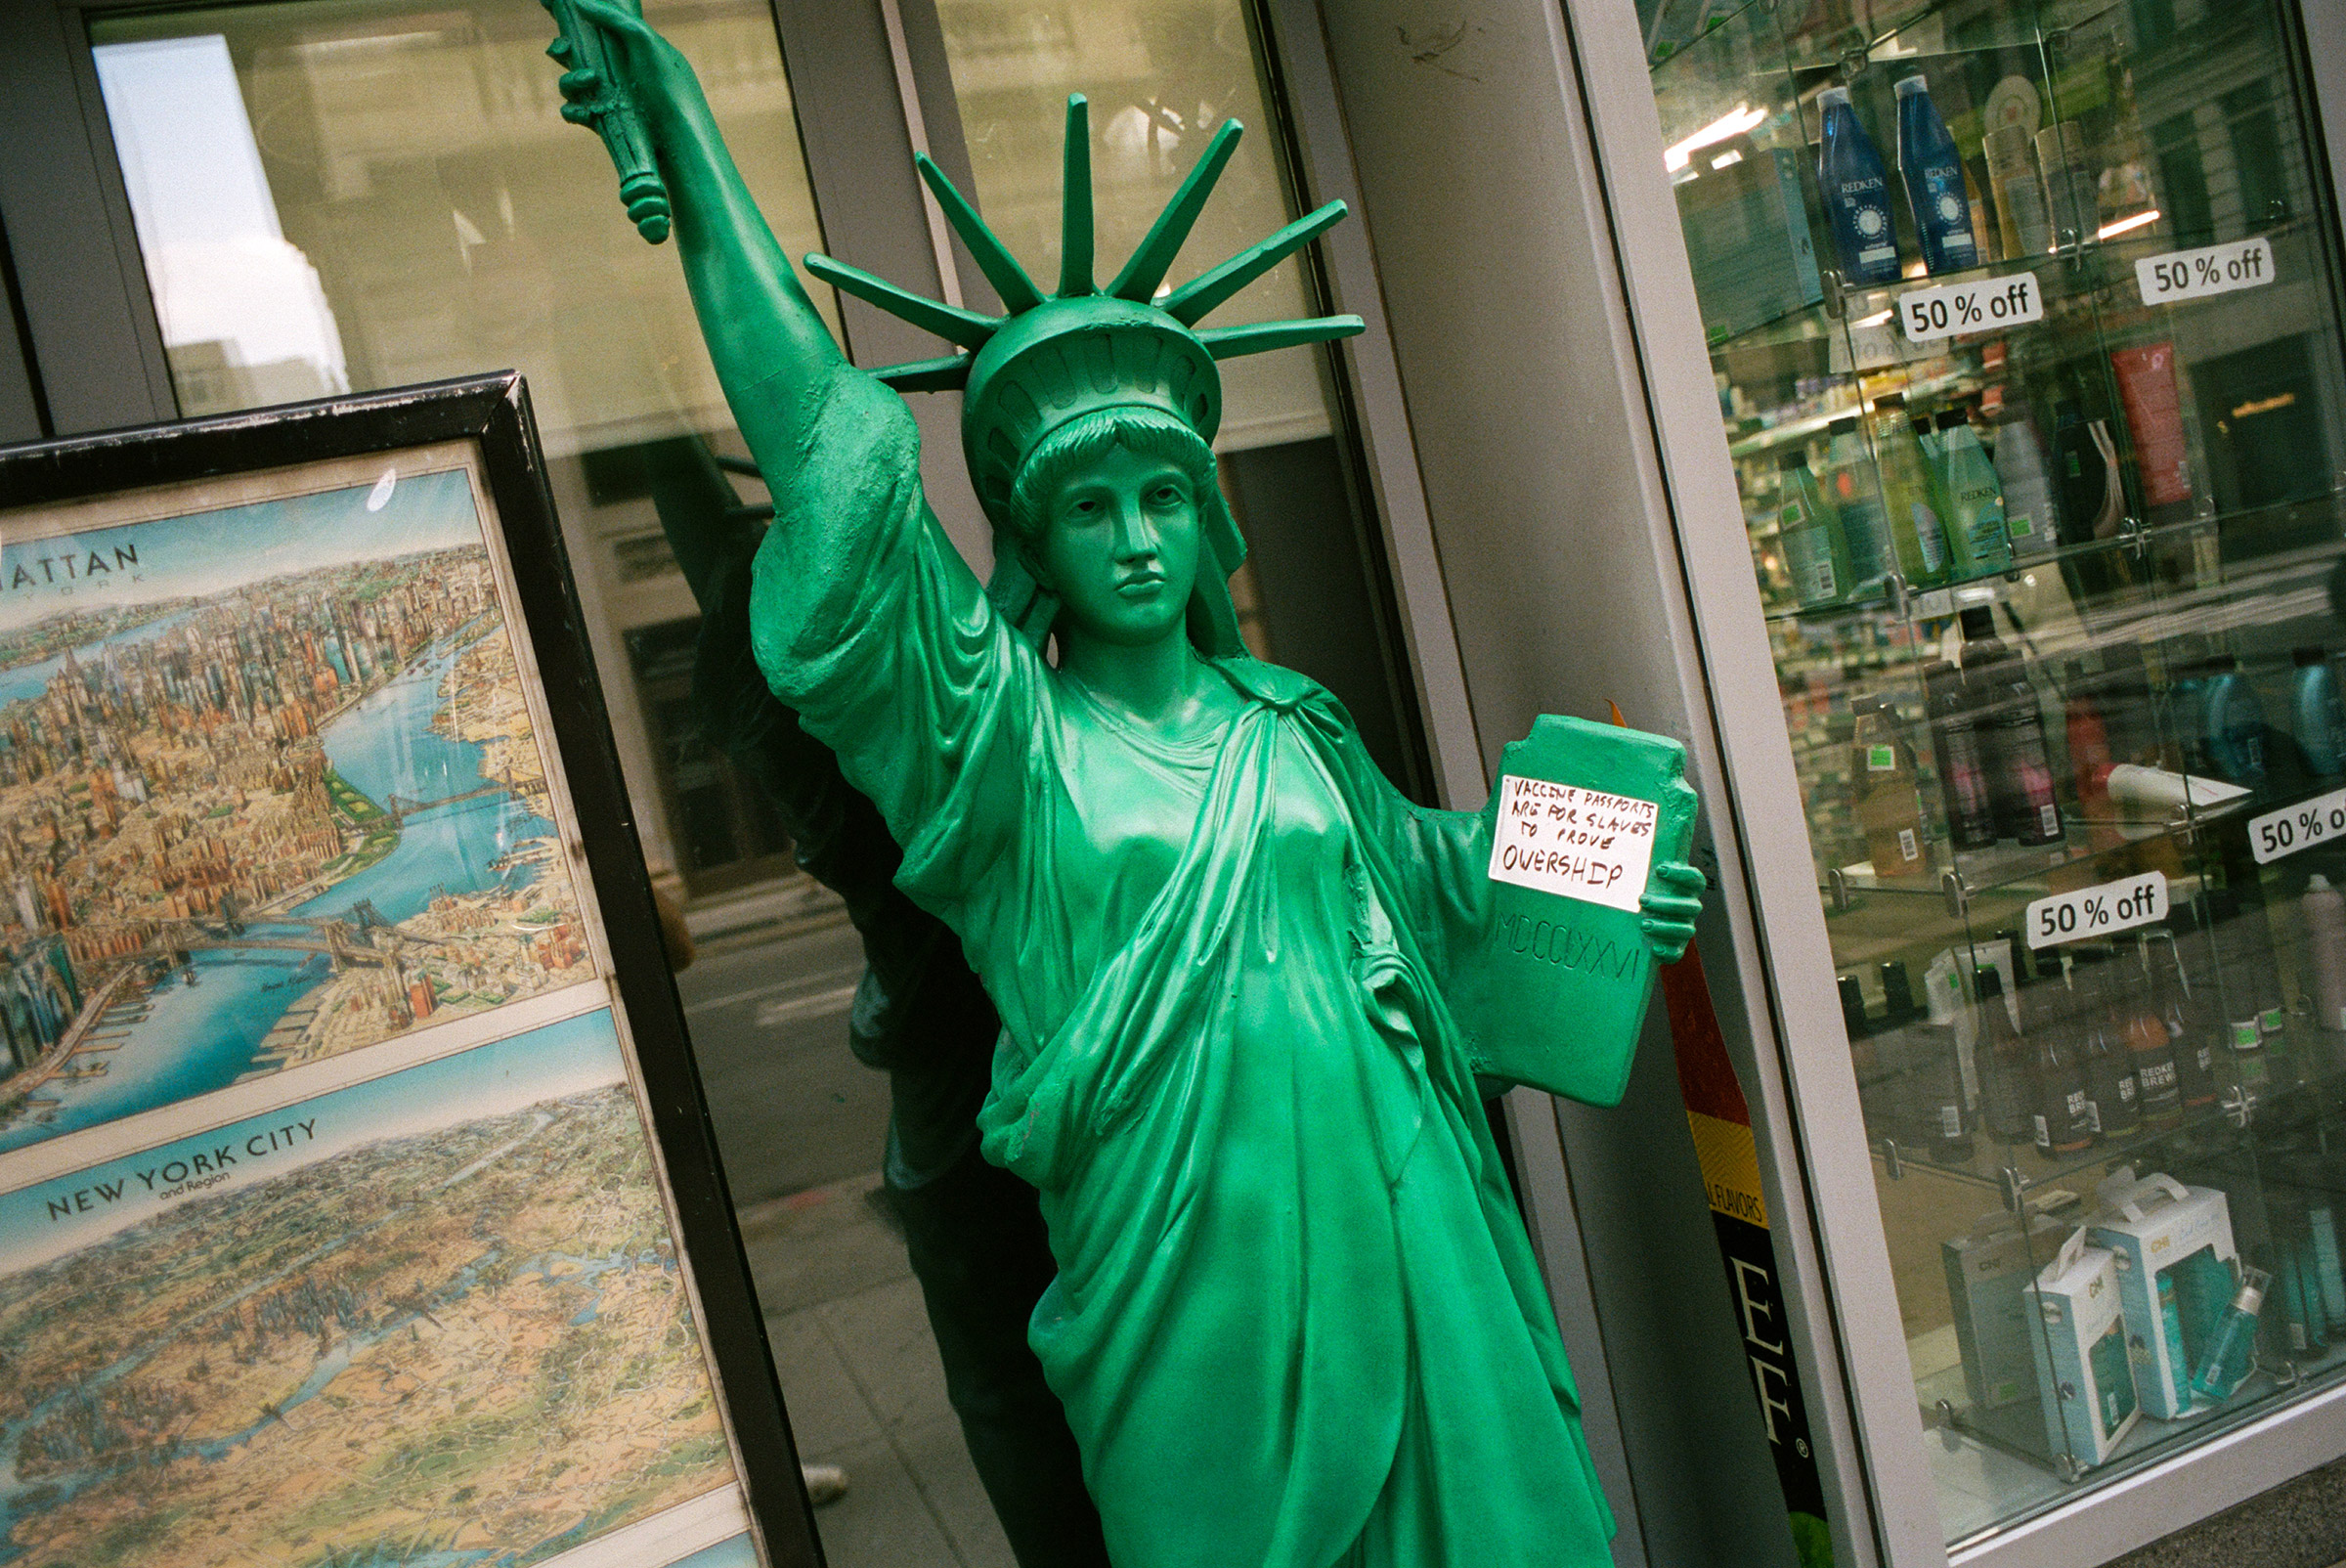 A prop Statue Of Liberty inadvertently advertises an anti-vaccination protestor message on her tablet, Aug. 26, 2021. (Daniel Arnold for TIME)